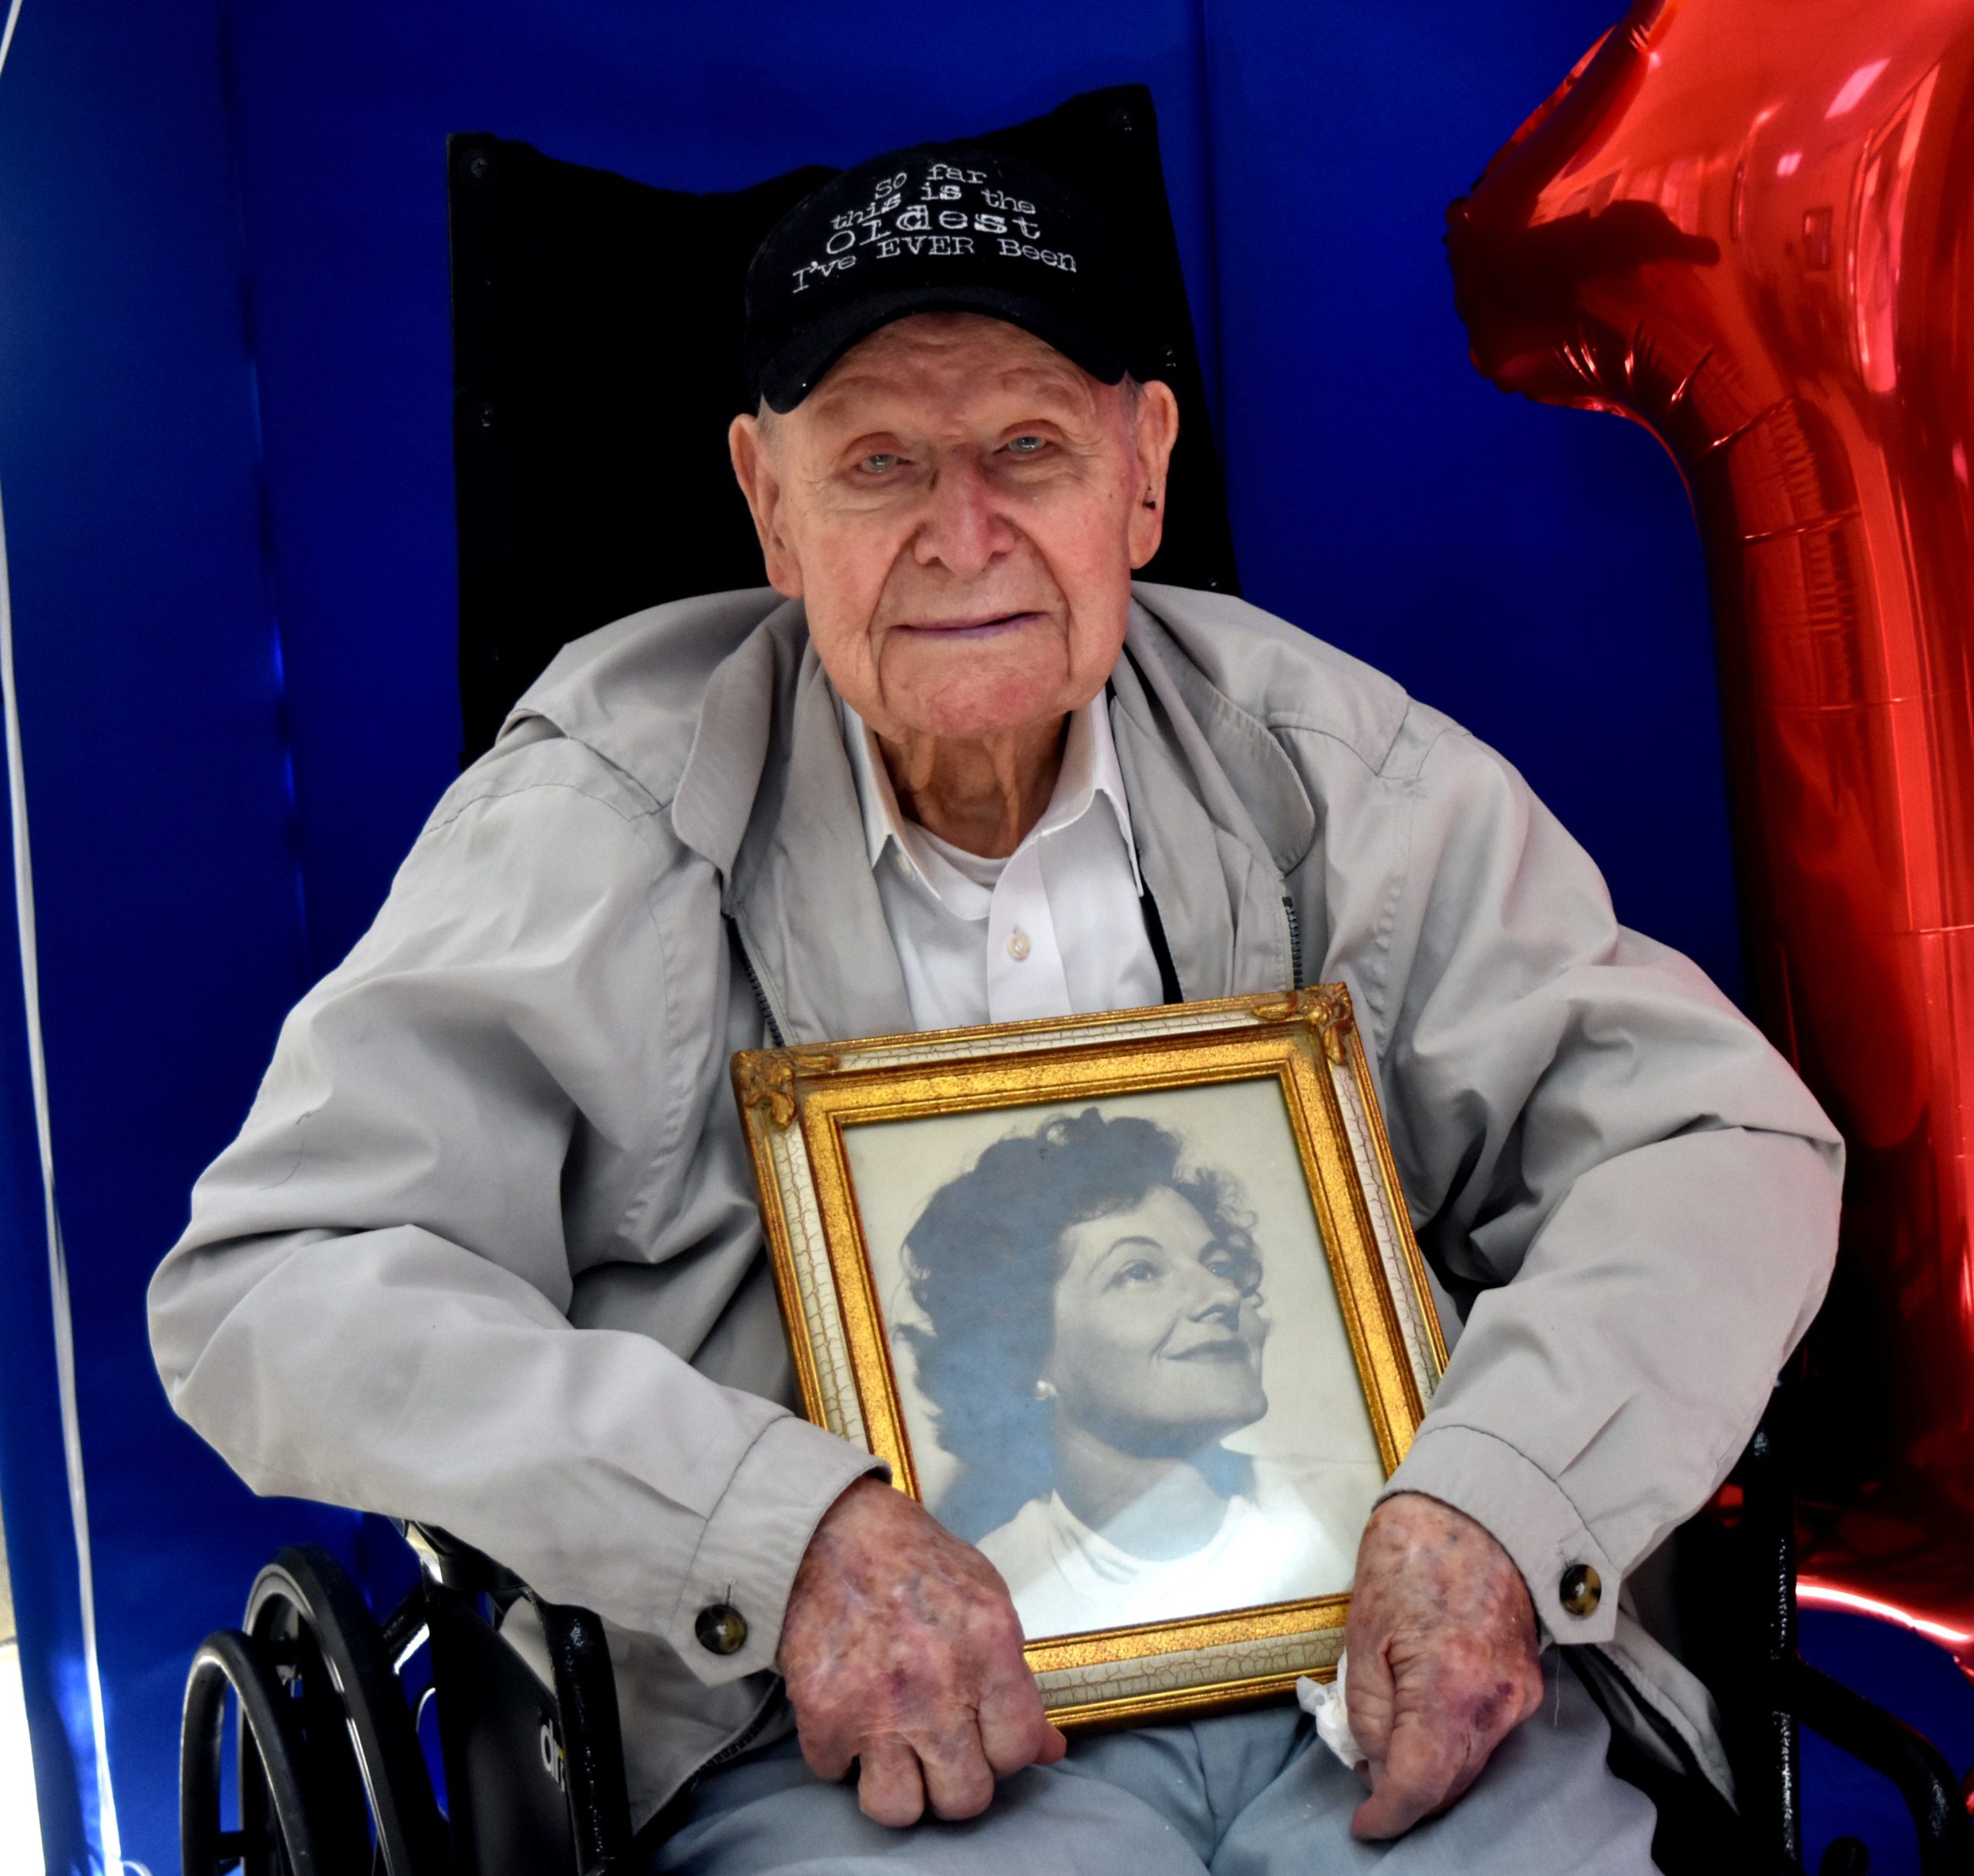 Albert Maddux will be 105 years-old on Dec, 8. He is pictured holding a portrait of his late wife Vivian when she was in her 30’s. They were married for 55 years. [RAMON RIOS/PRESS GAZETTE]